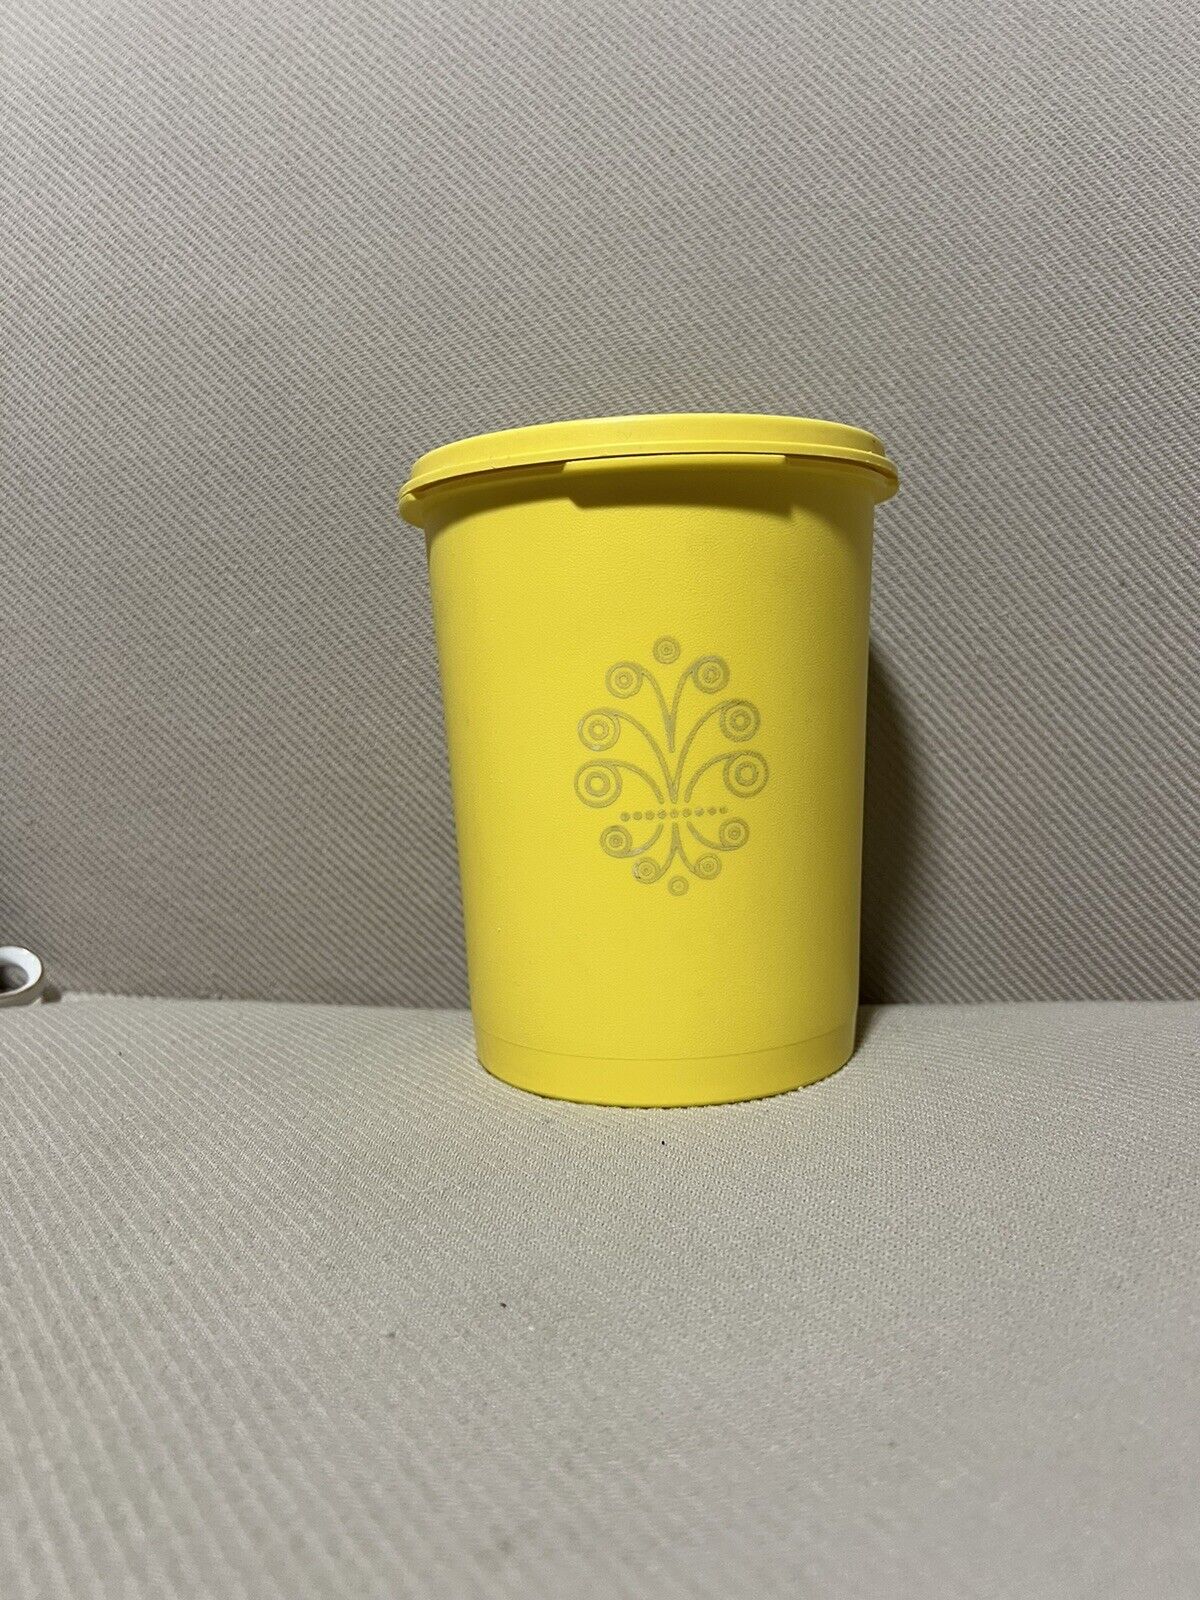 Retro TUPPERWARE 811-5 SUNSHINE-YELLOW Servalier Stackable Small Canister